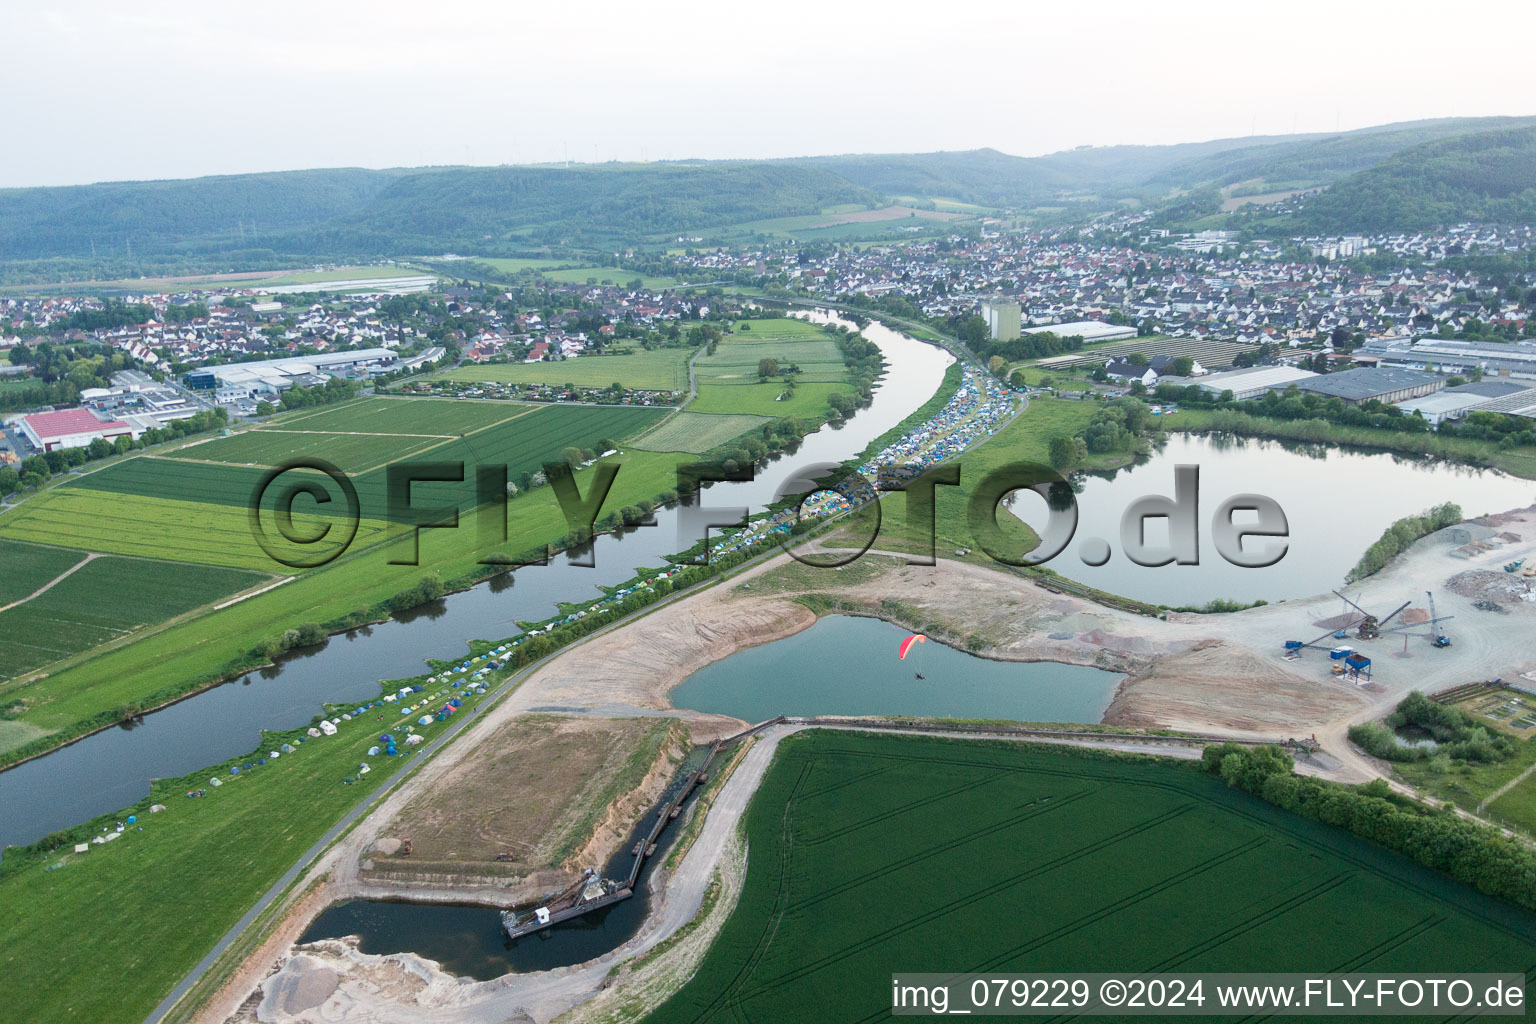 Riparian zones on the course of the river of the Weser river in Beverungen in the state North Rhine-Westphalia, Germany